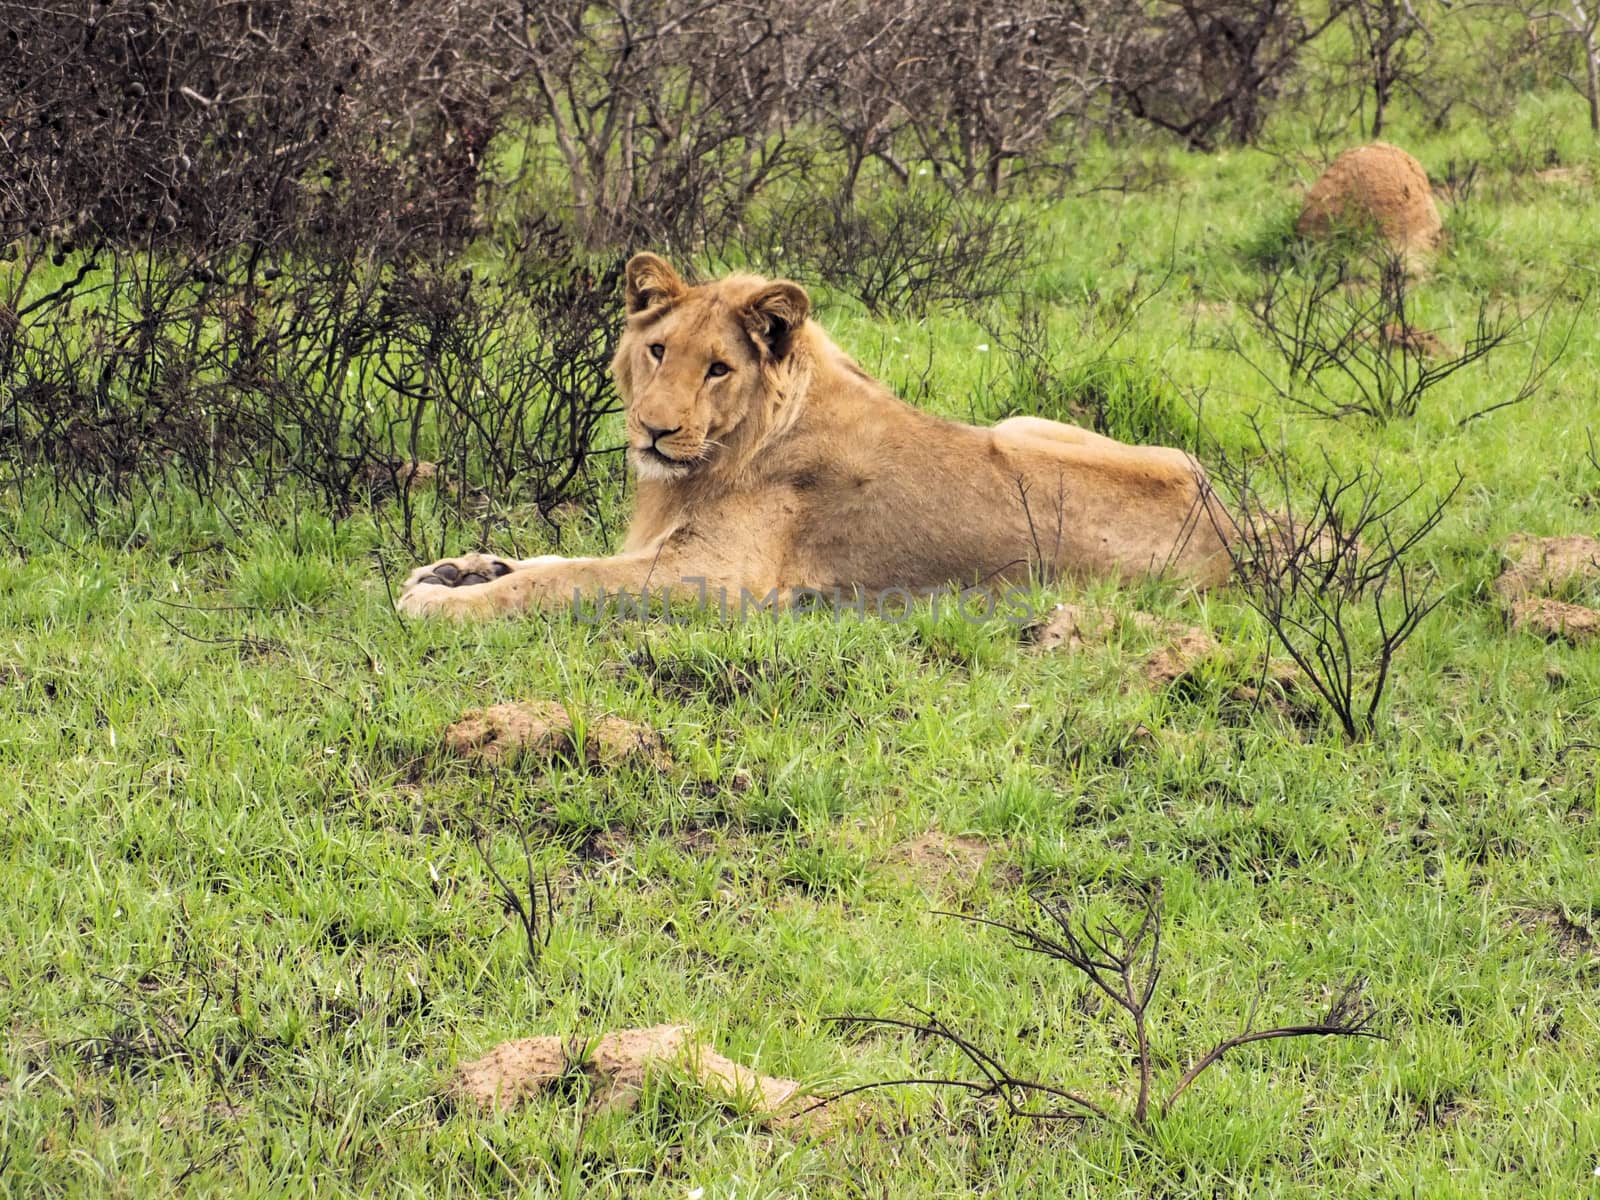 A lioness (Panthera leo) resting on the grass plains of South Africa's Eastern Cape